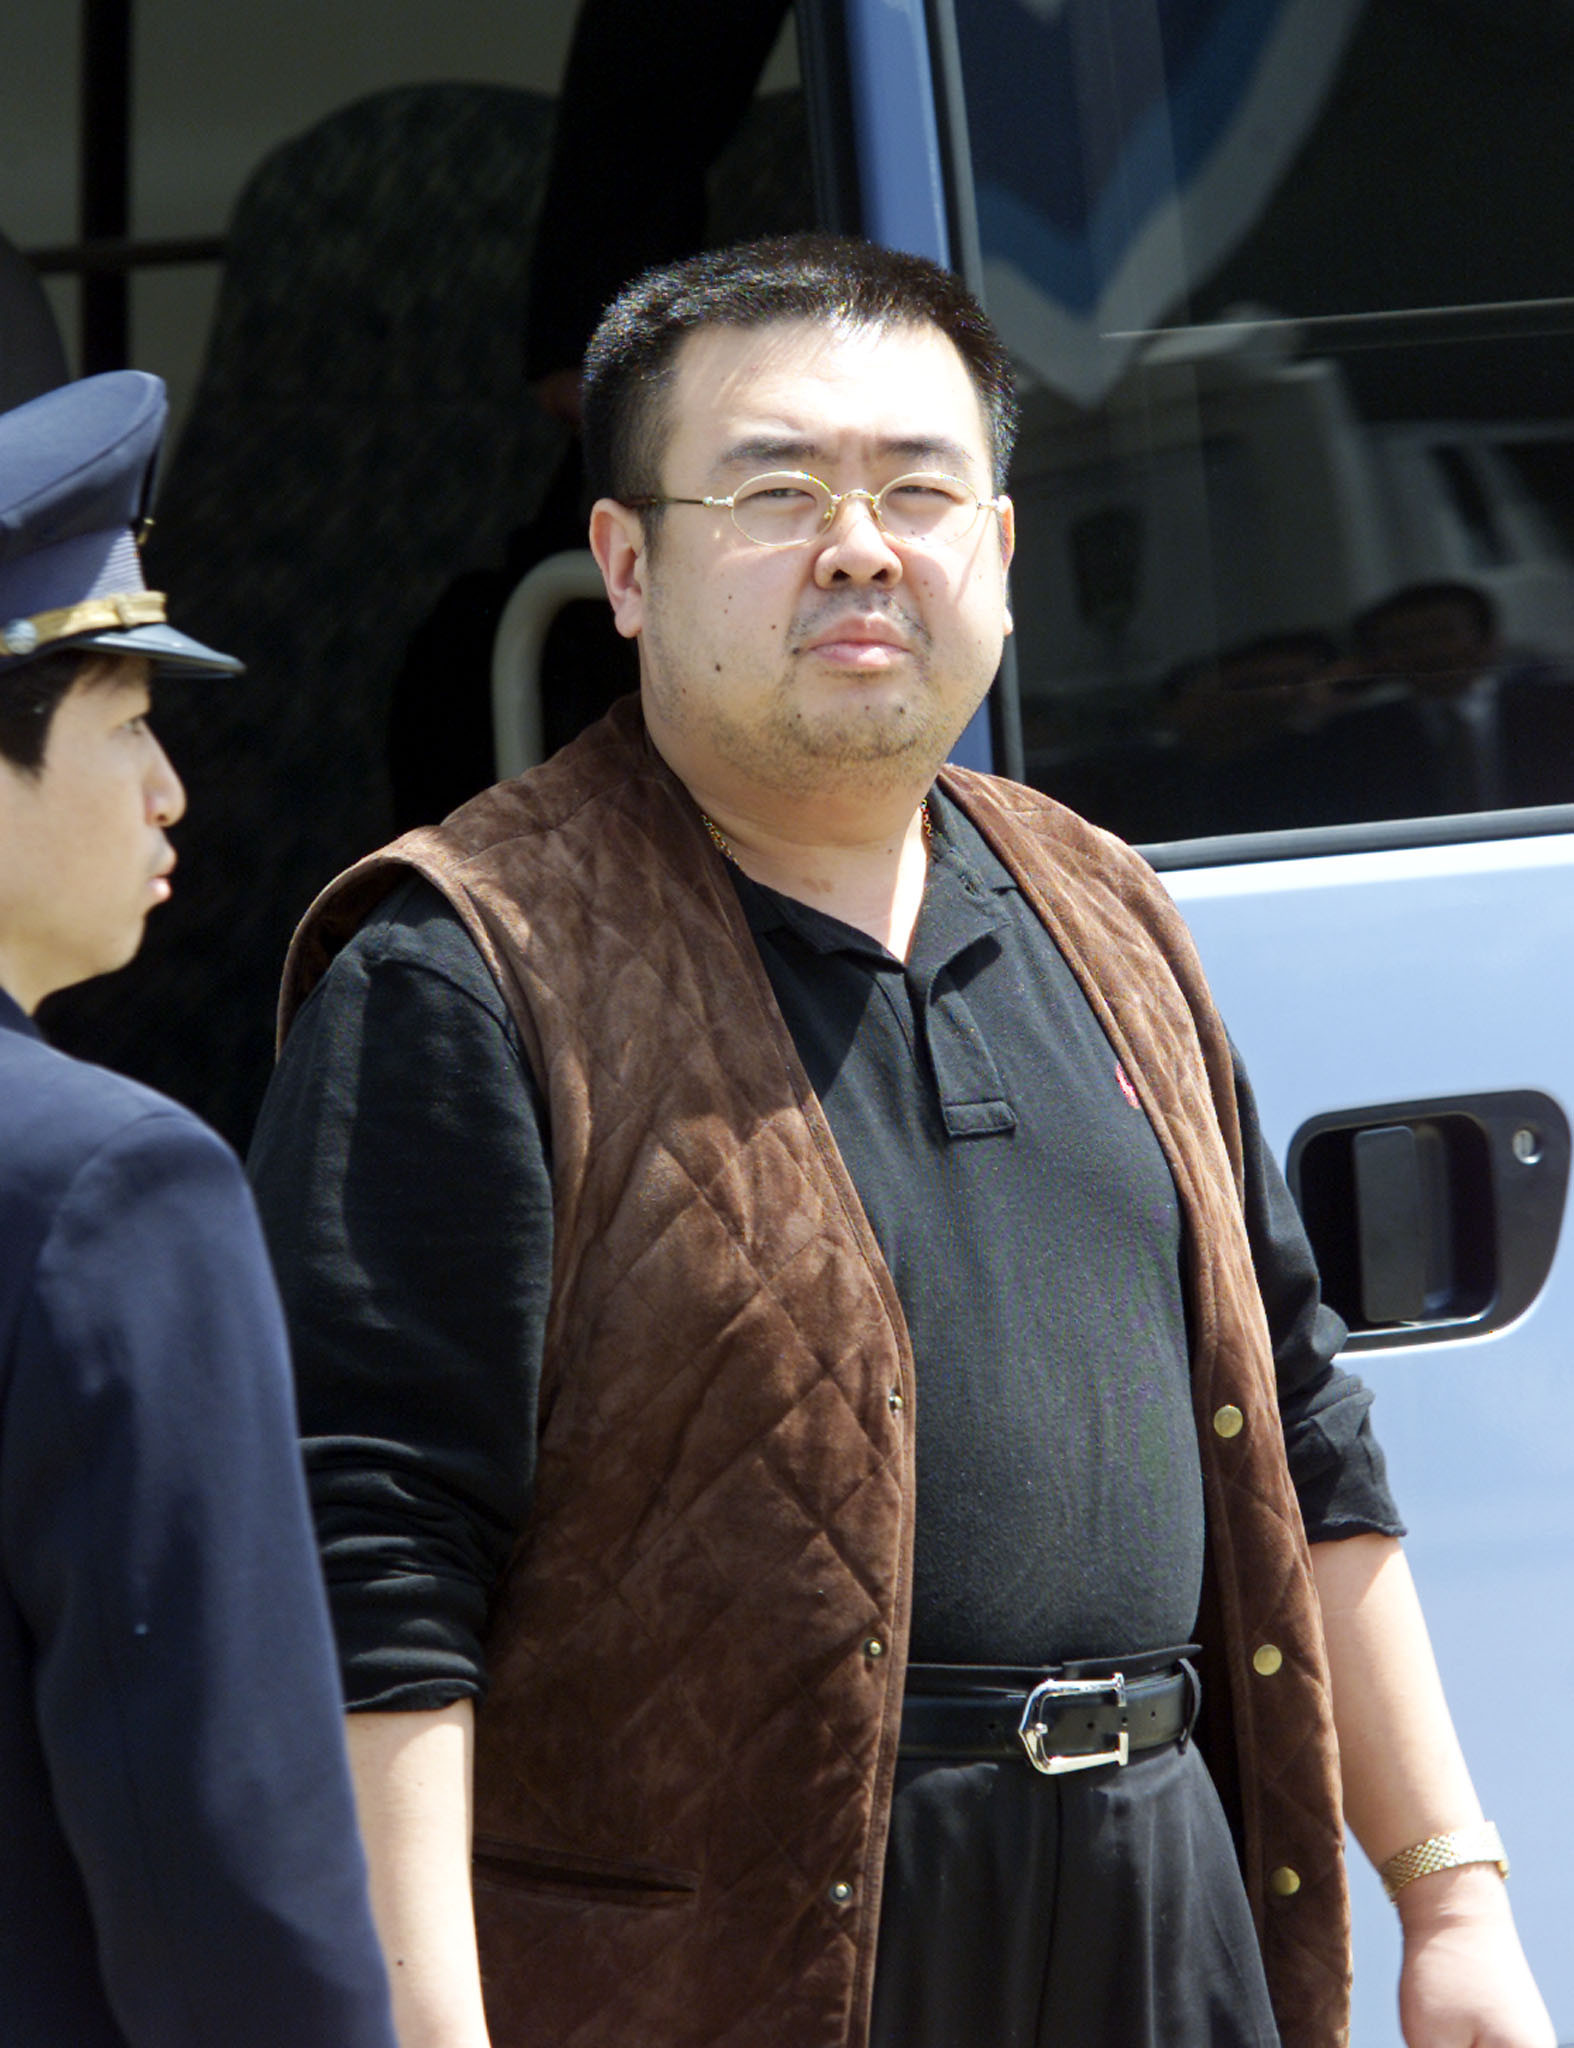 The death of Kim Jong-nam strained relations between North Korea and Malaysia ©Getty Images